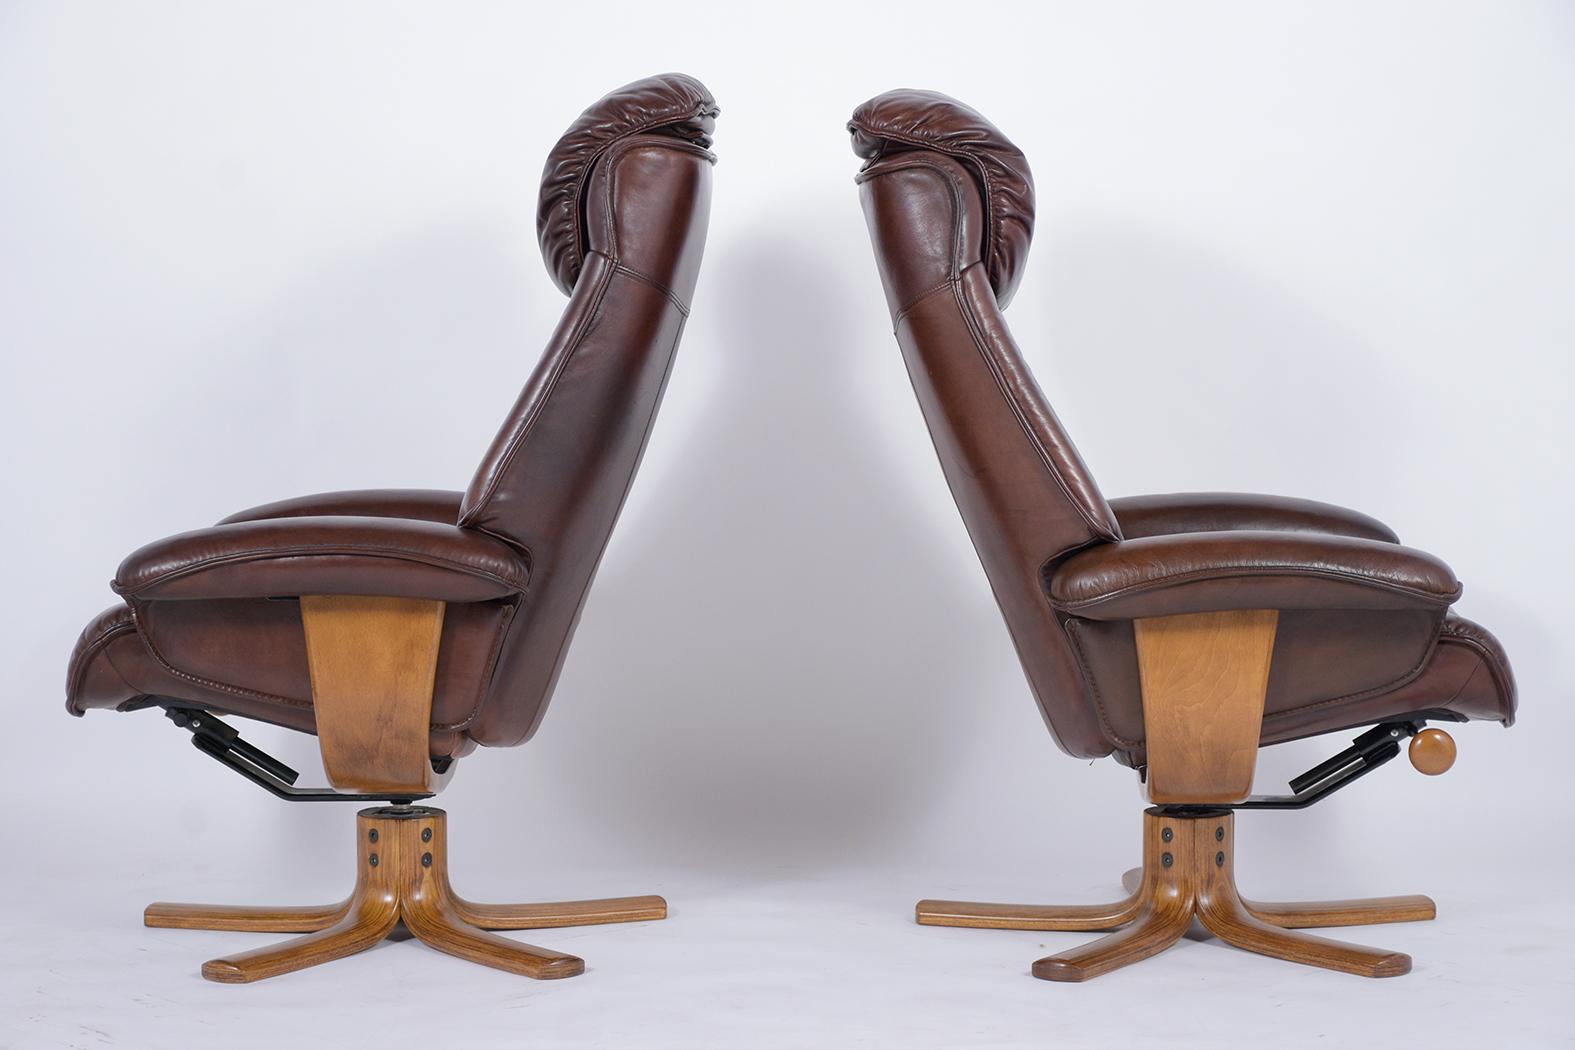 Polyester 1980s Danish Leather Lounge Chair & Ottoman Set - Vintage Elegance For Sale